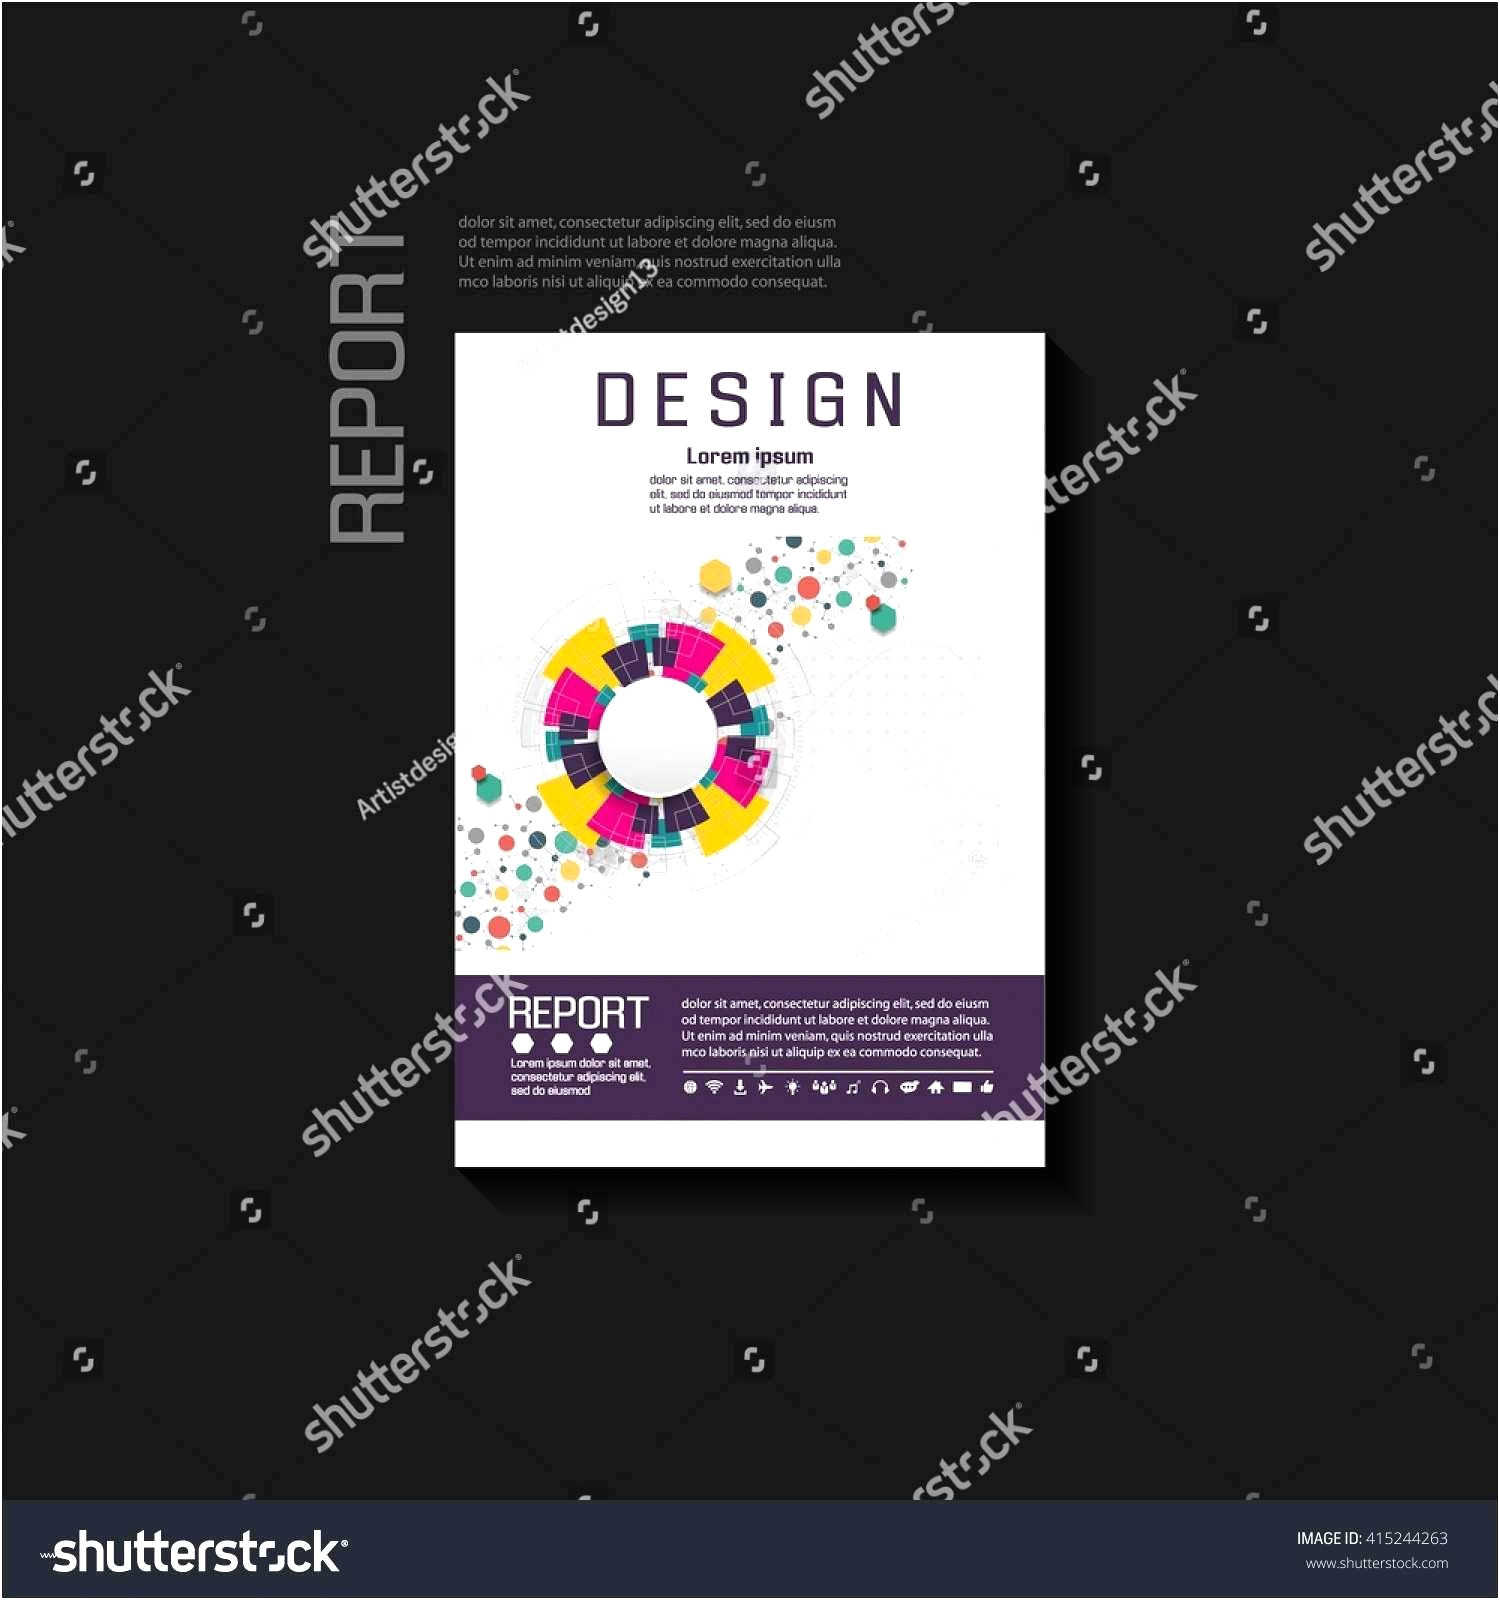 business card holder archives dalriadaproject of create a business card template of create a business card template jpg